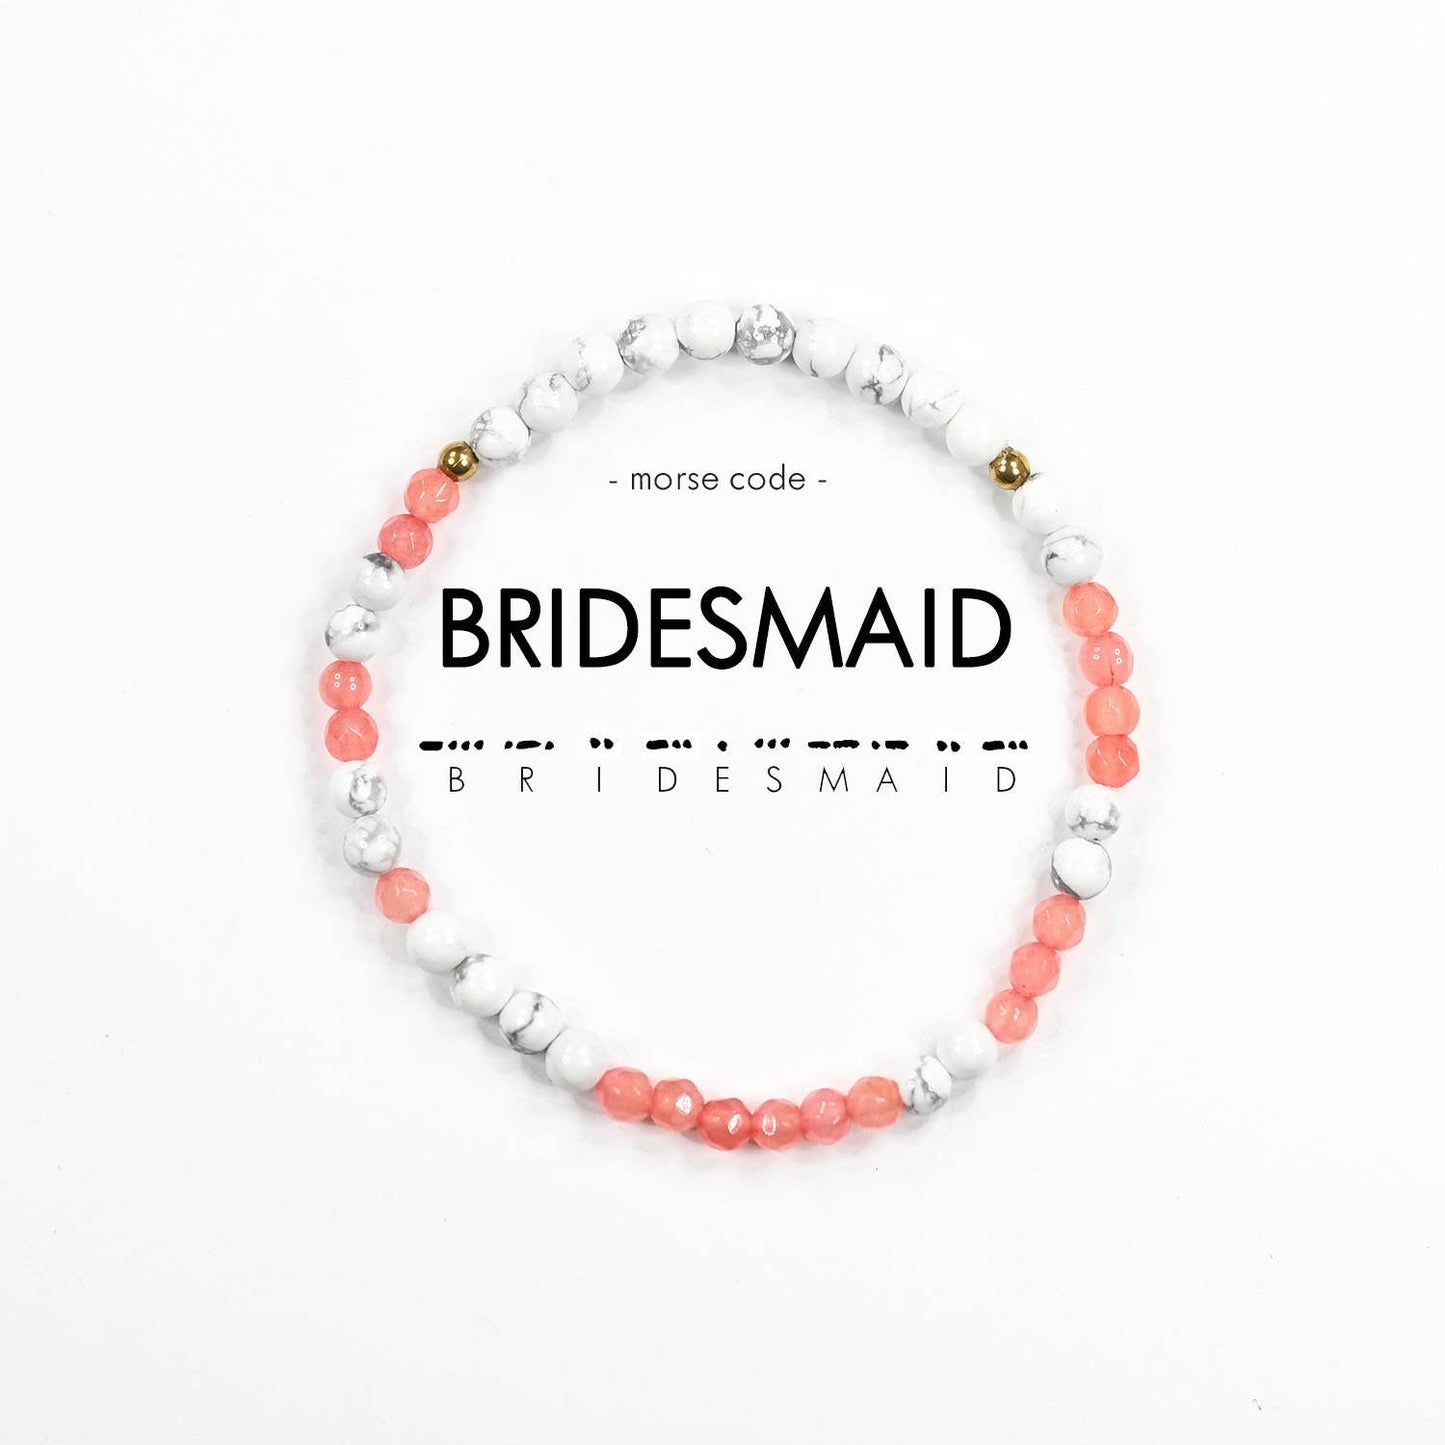 Load image into Gallery viewer, Bridesmaid Morse Code Bracelet
